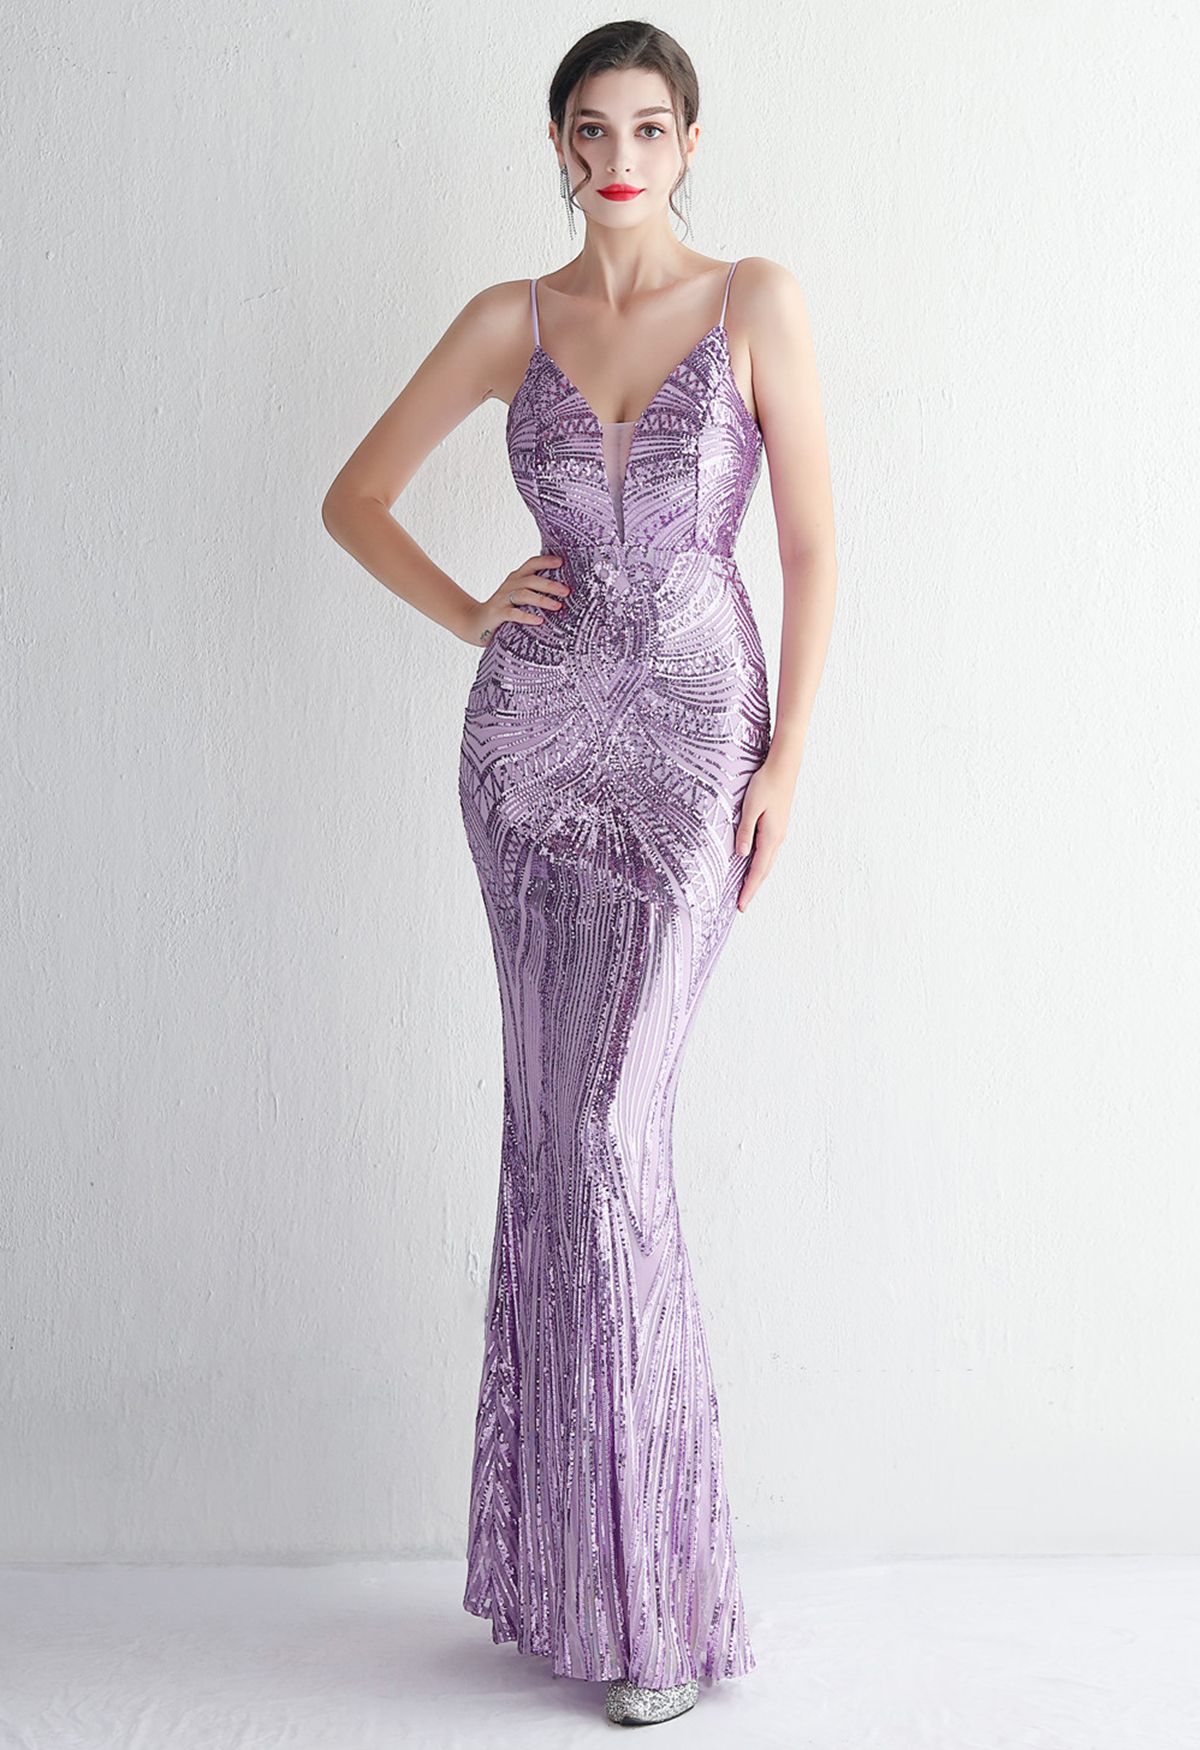 Glimmer Sequin Mermaid Cami Gown in Purple